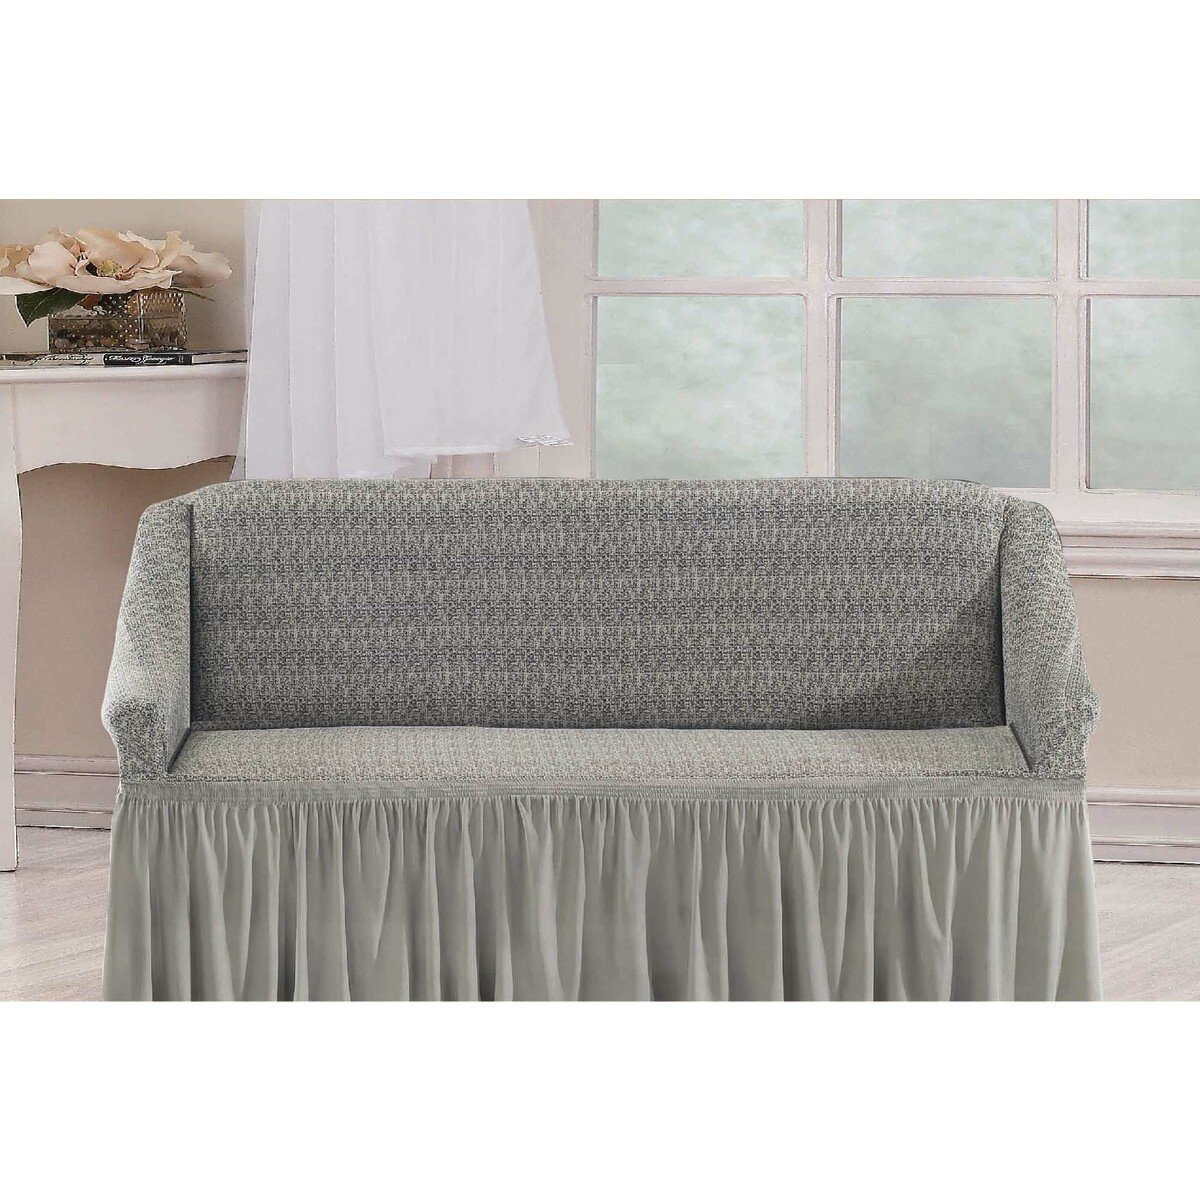 Cannon Sofa Cover 3 Seater Beige